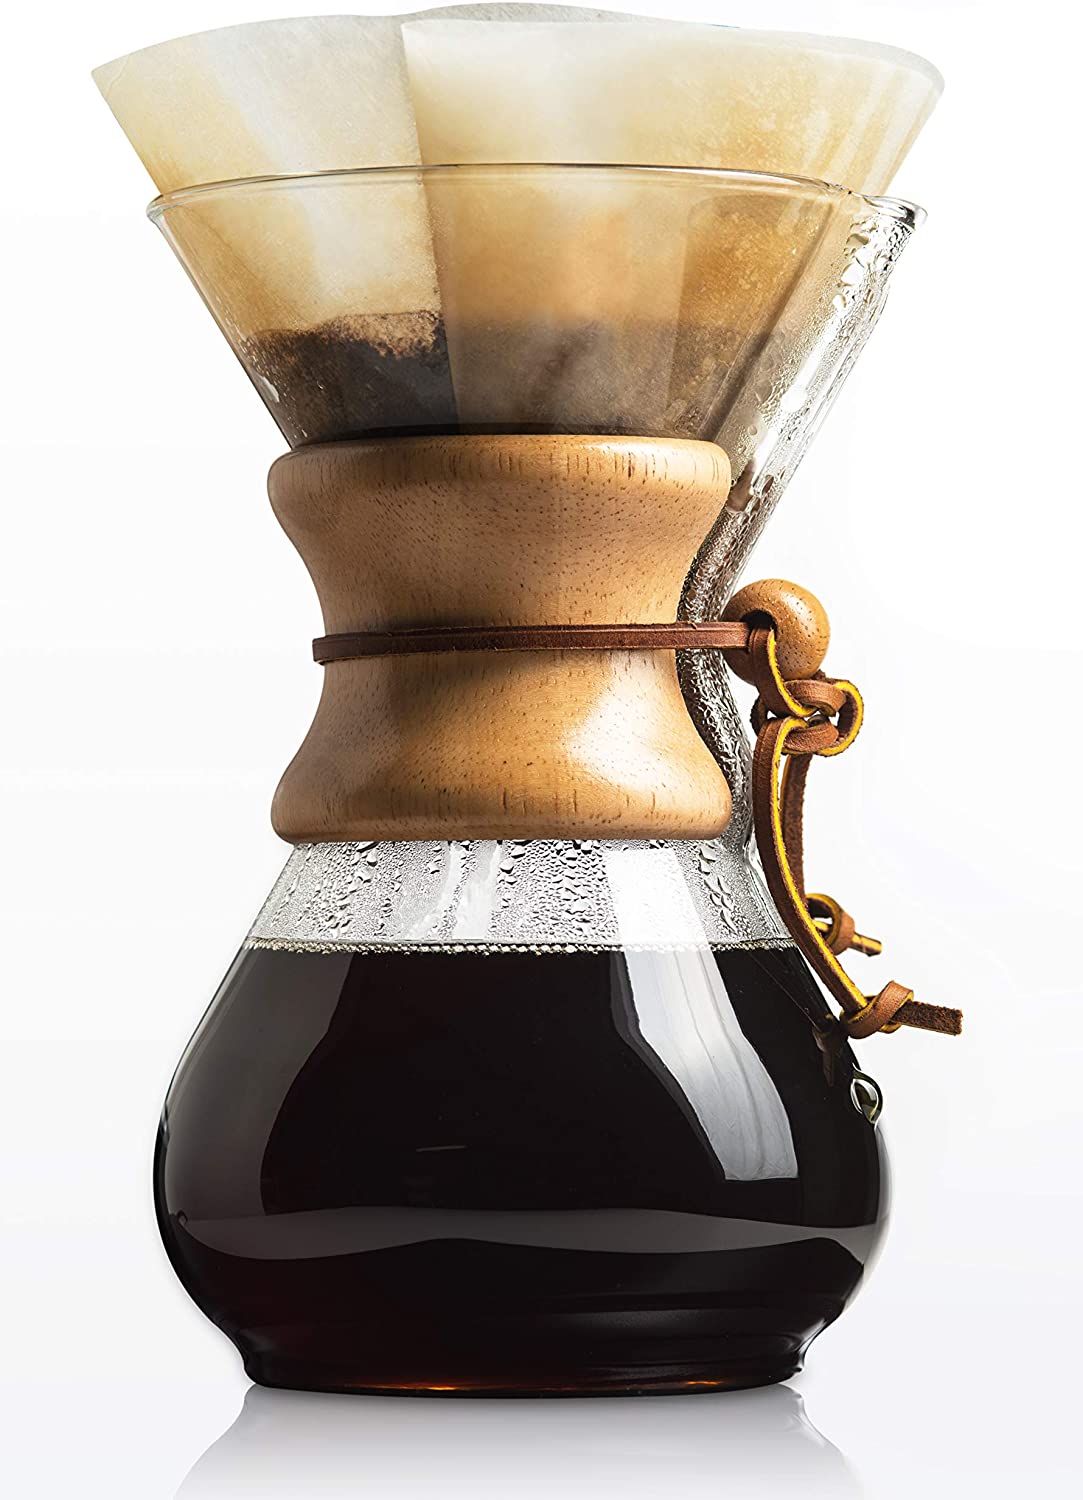 Chemex 8-Cup Brewer – Twin Valley Coffee